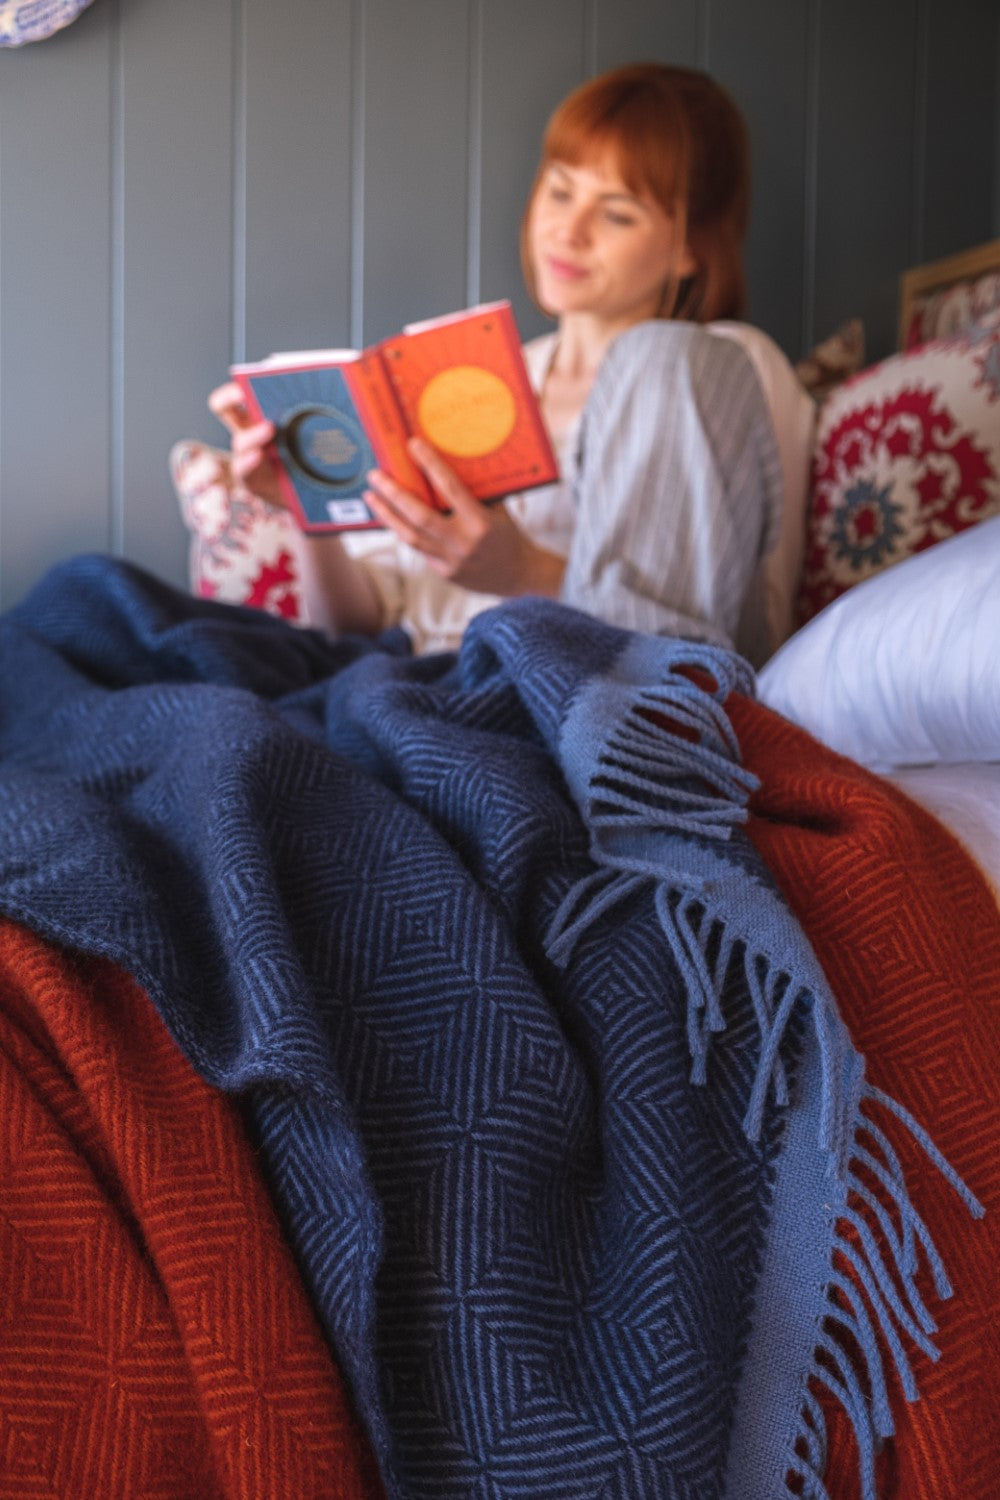 Blue and red wildweave wool blankets draped over a bed. A woman sitting cross legged is reading a book in the background